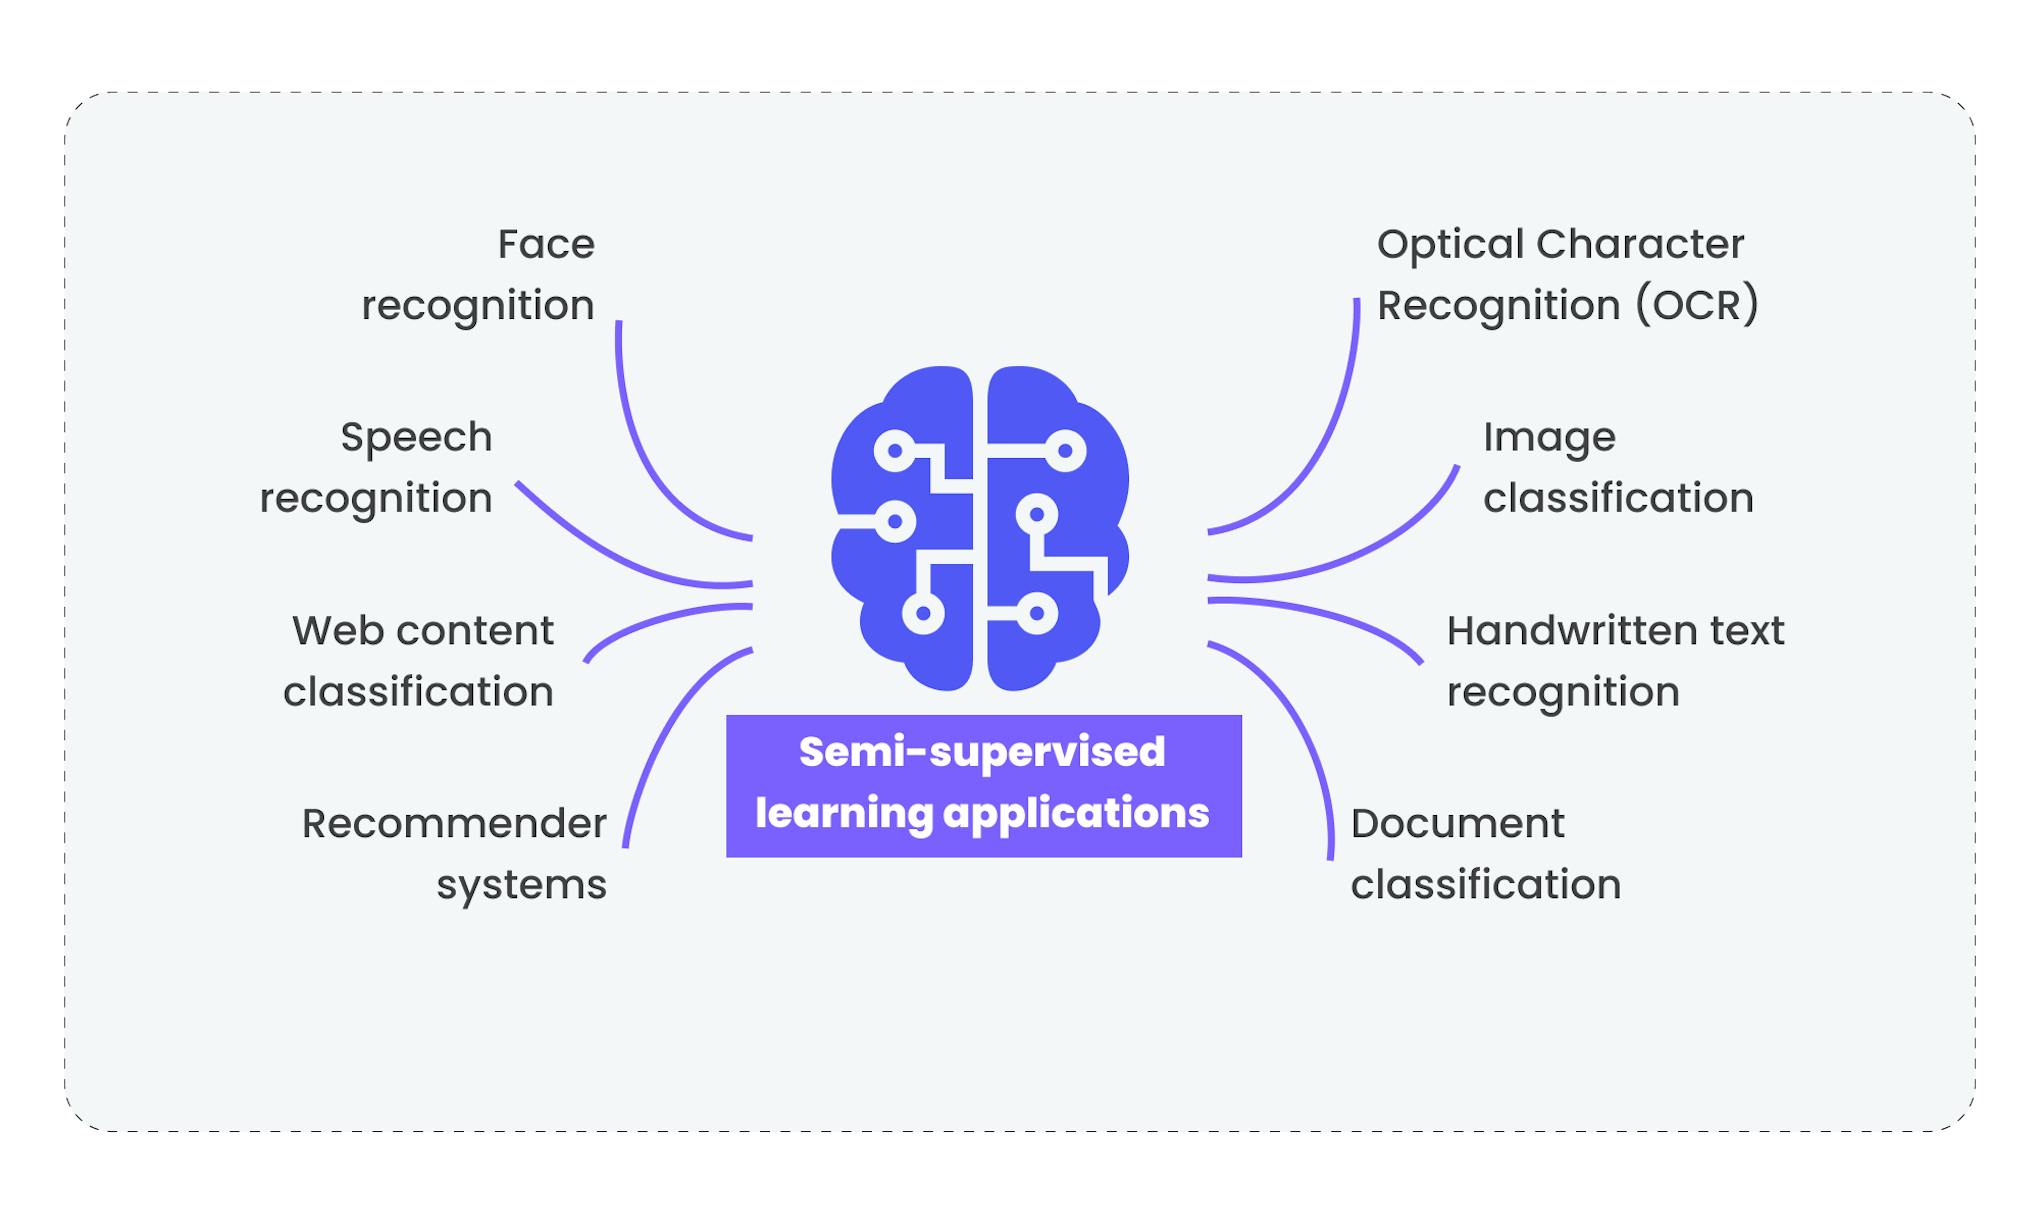 Semi-supervised learning applications example